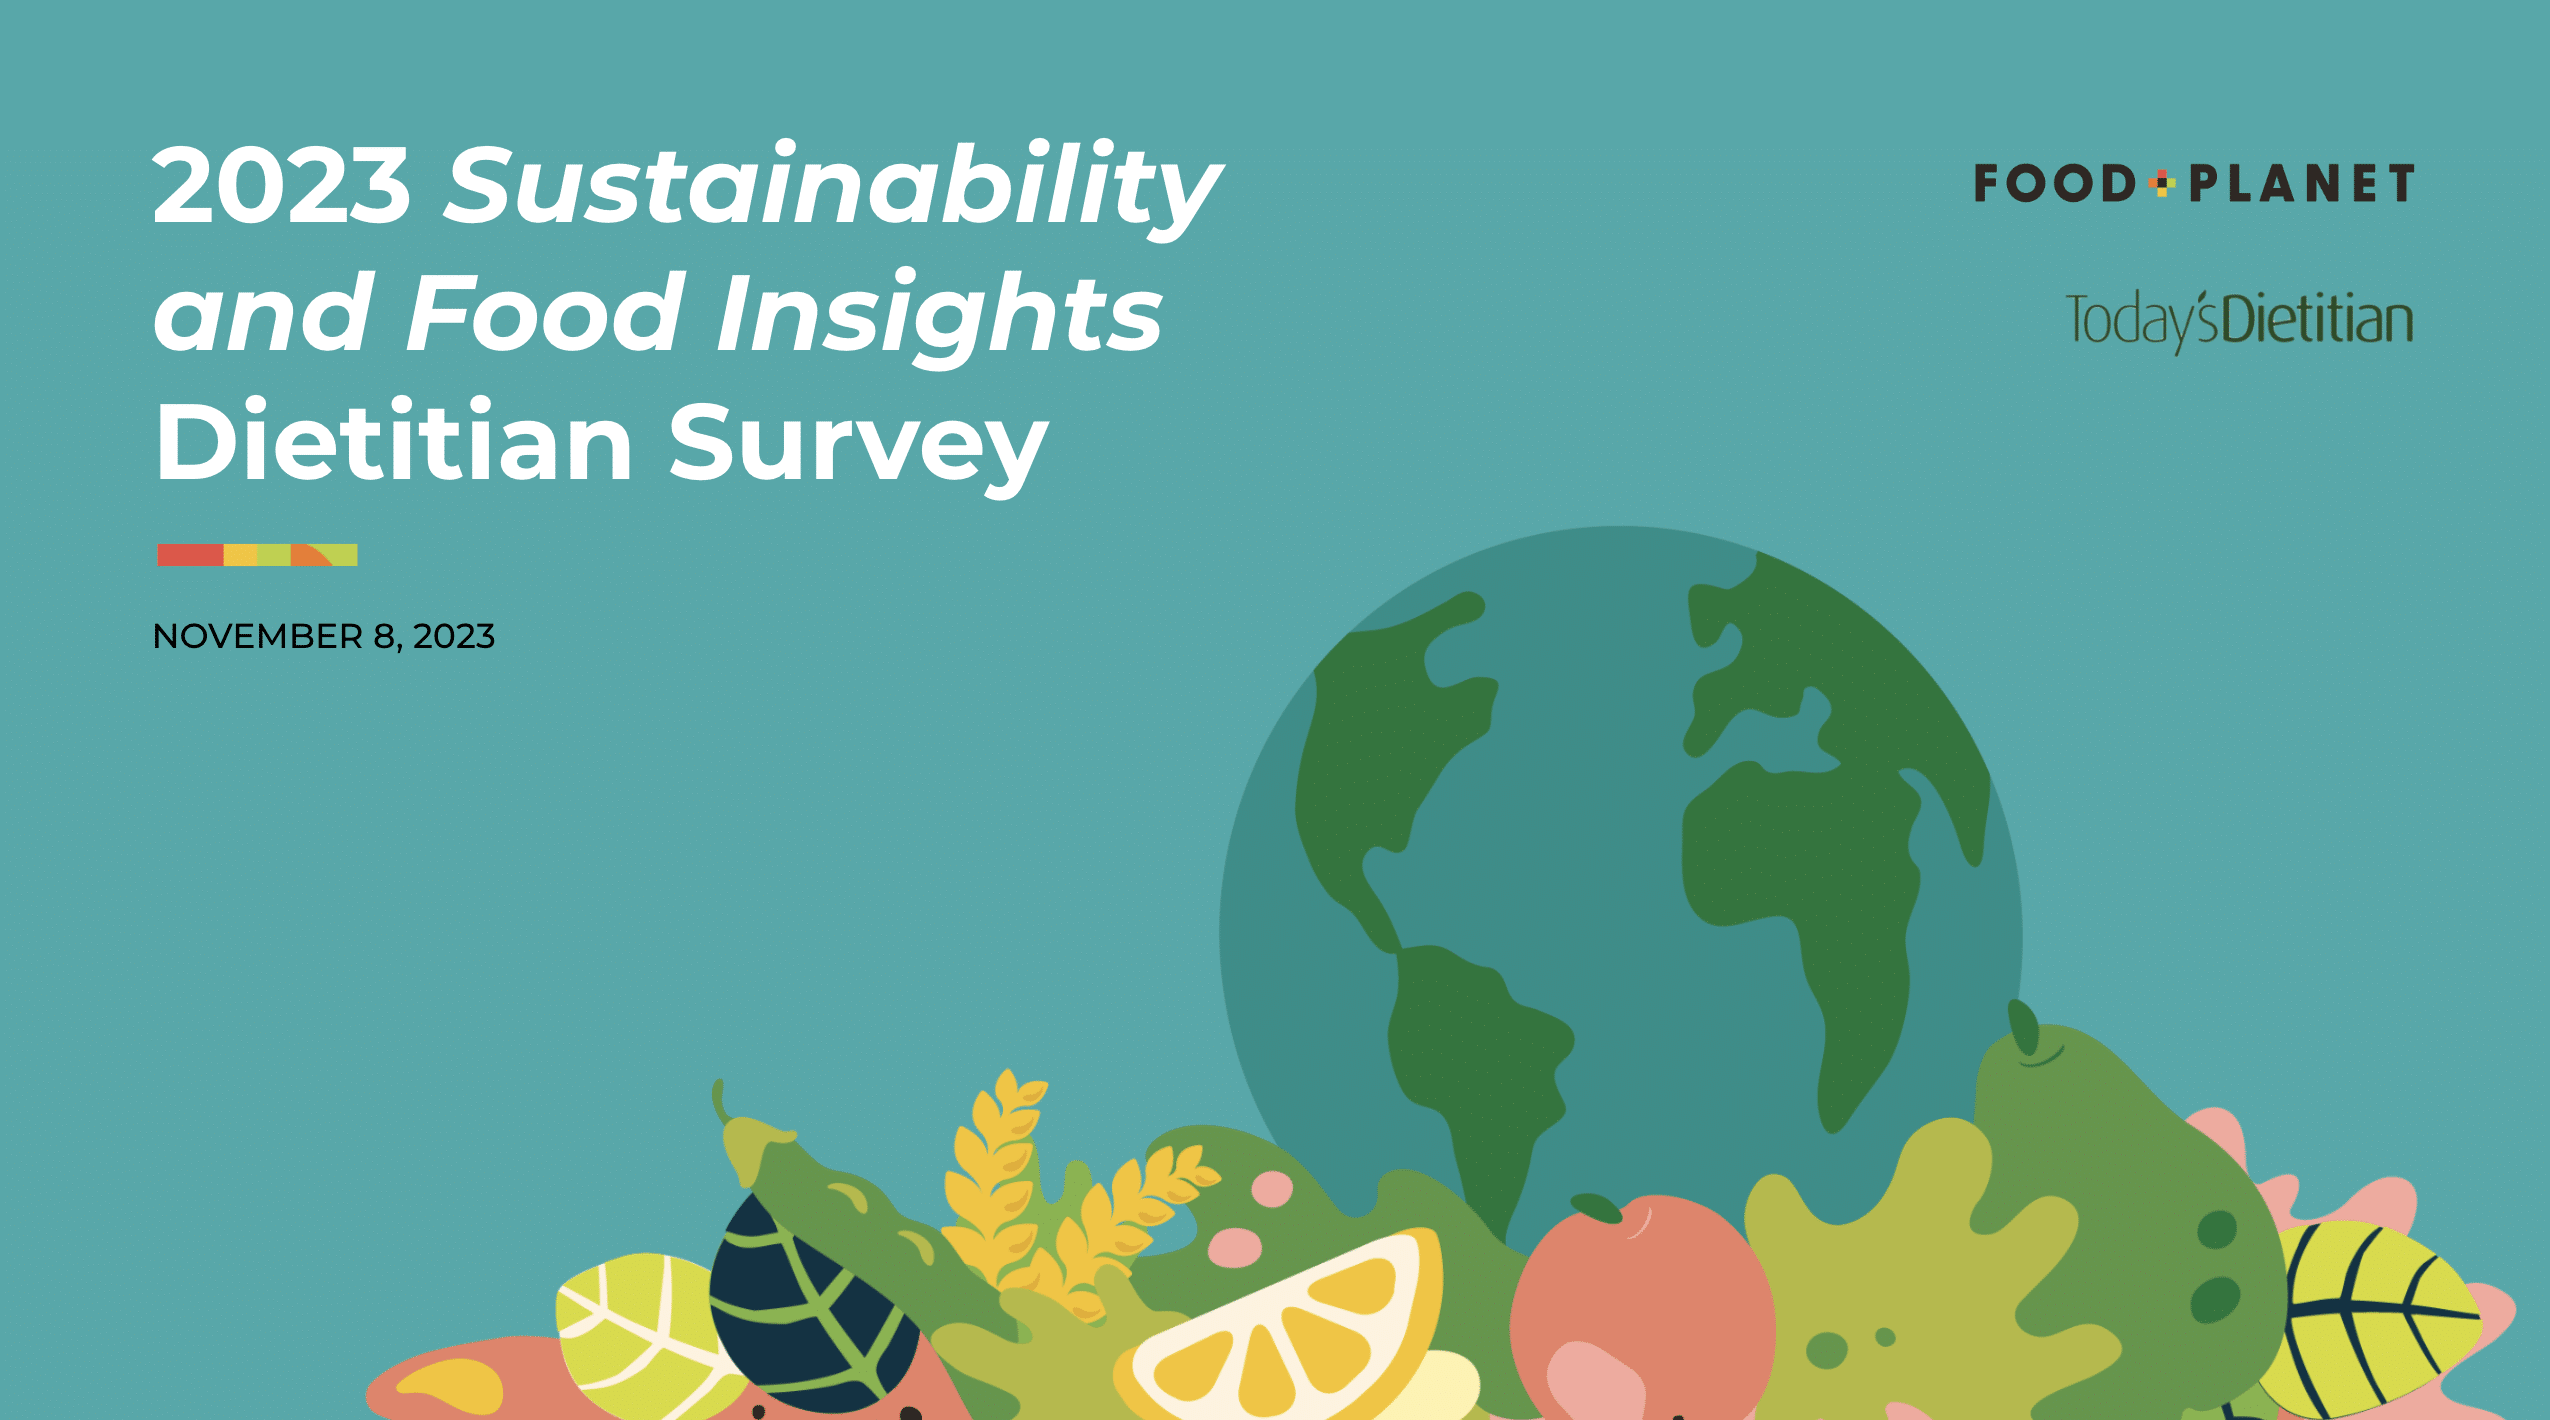 Food + Planet and Today’s Dietitian Release Results of 2023 Sustainability and Food Insights Survey